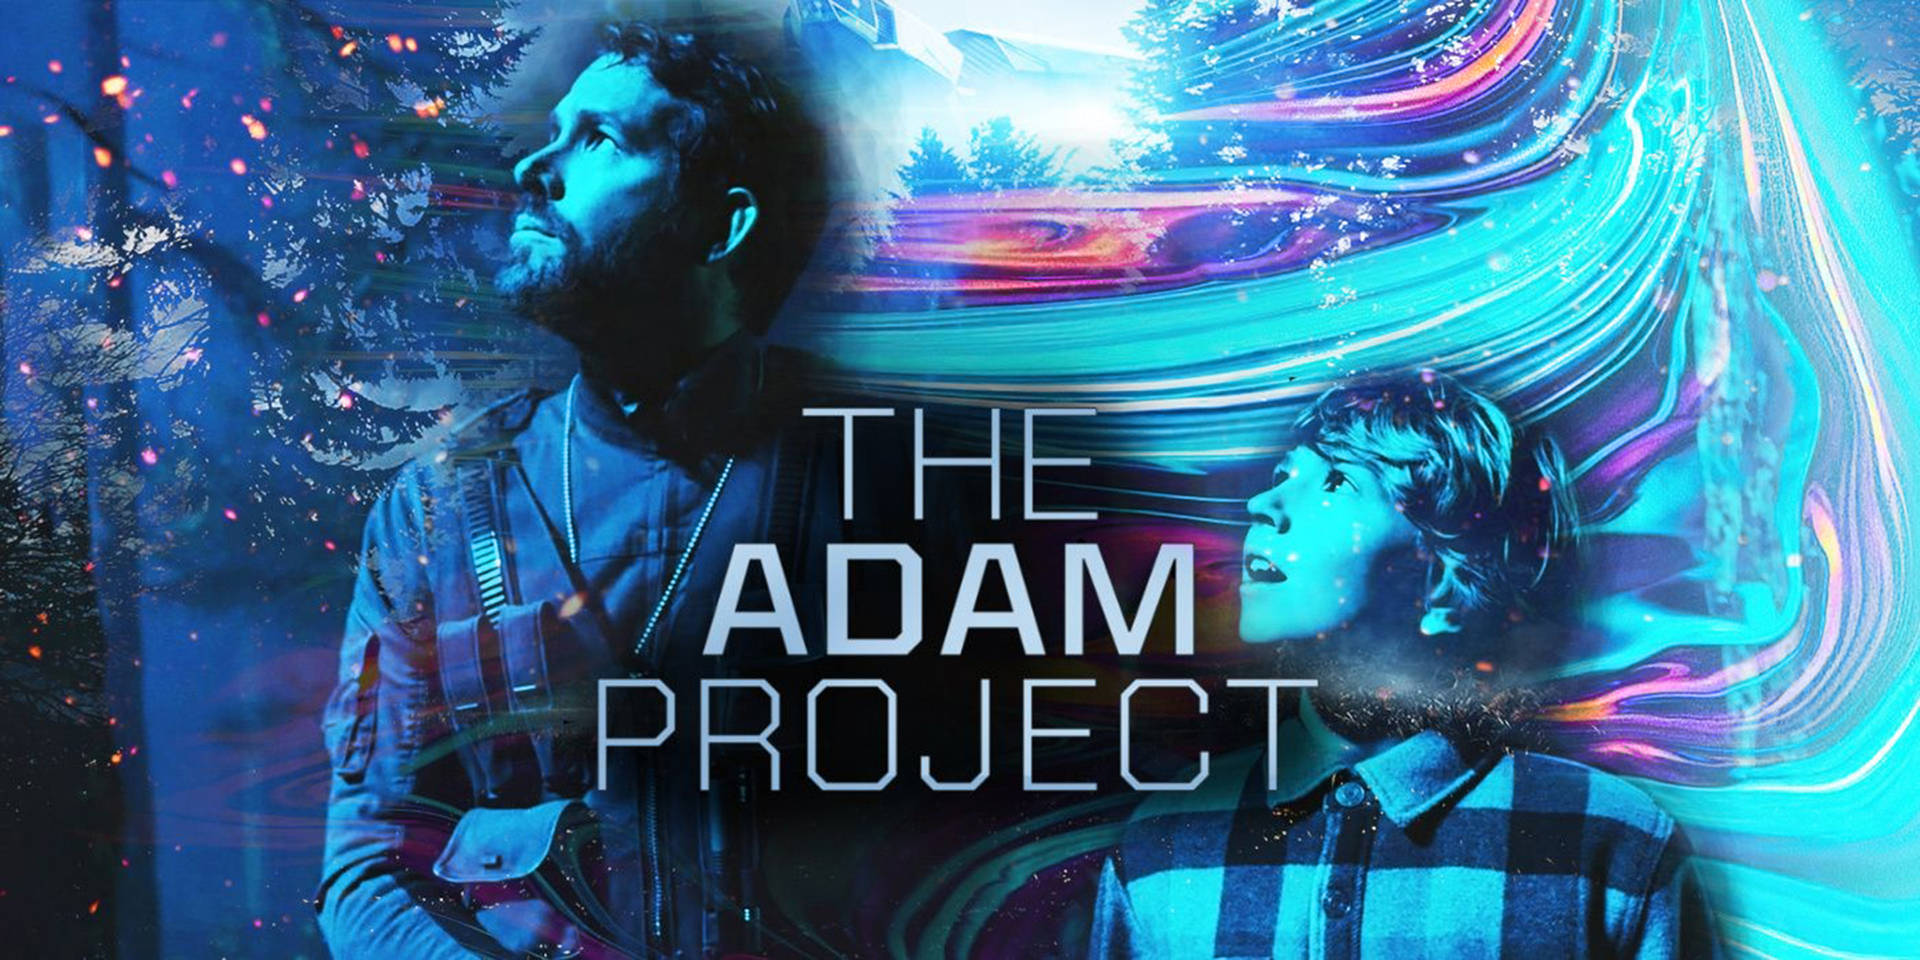 The Adam Project Abstract Art Background